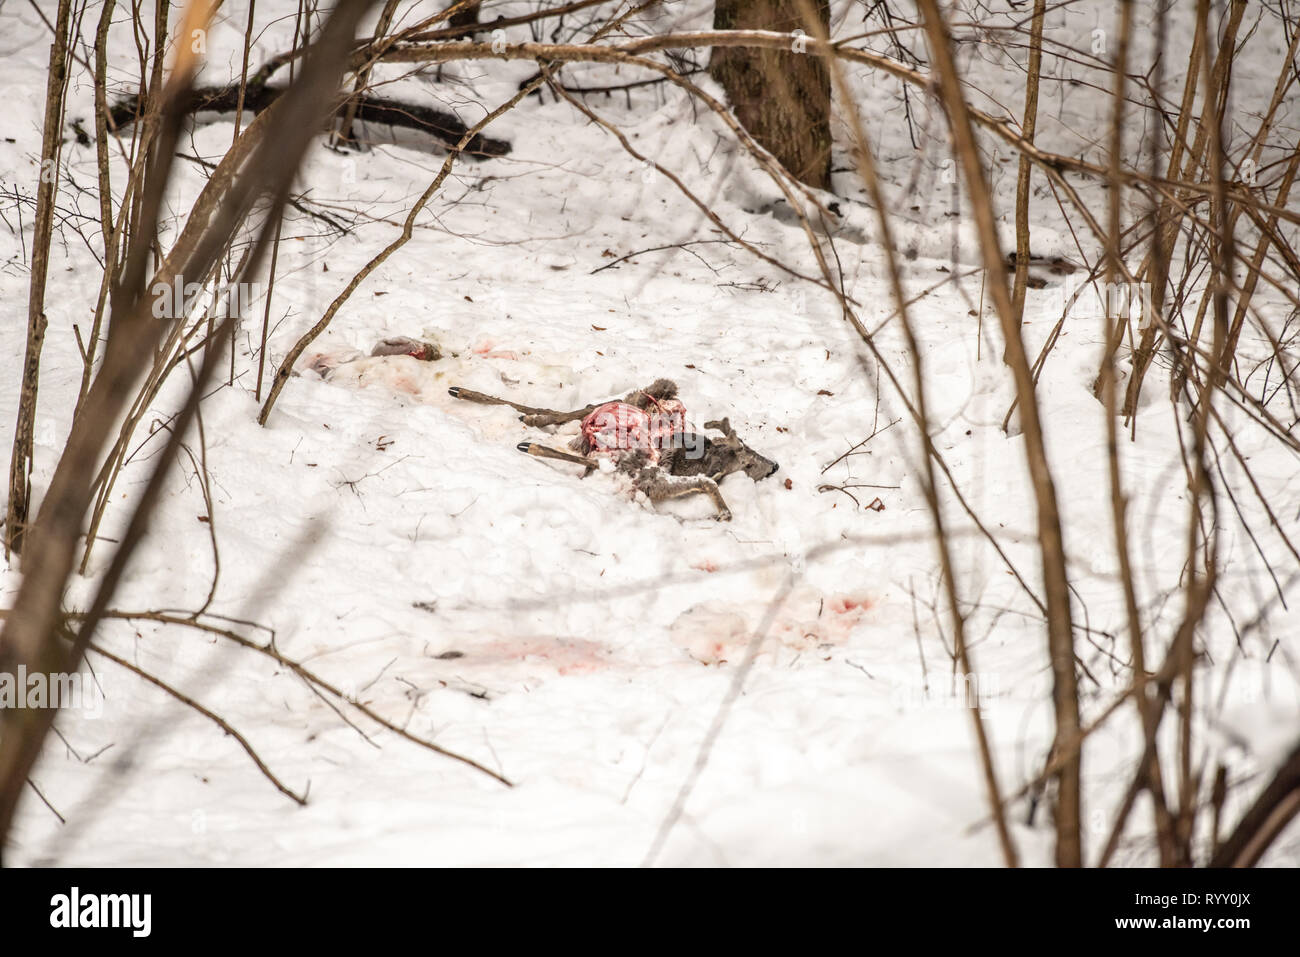 Deer carcass in the snow Stock Photo